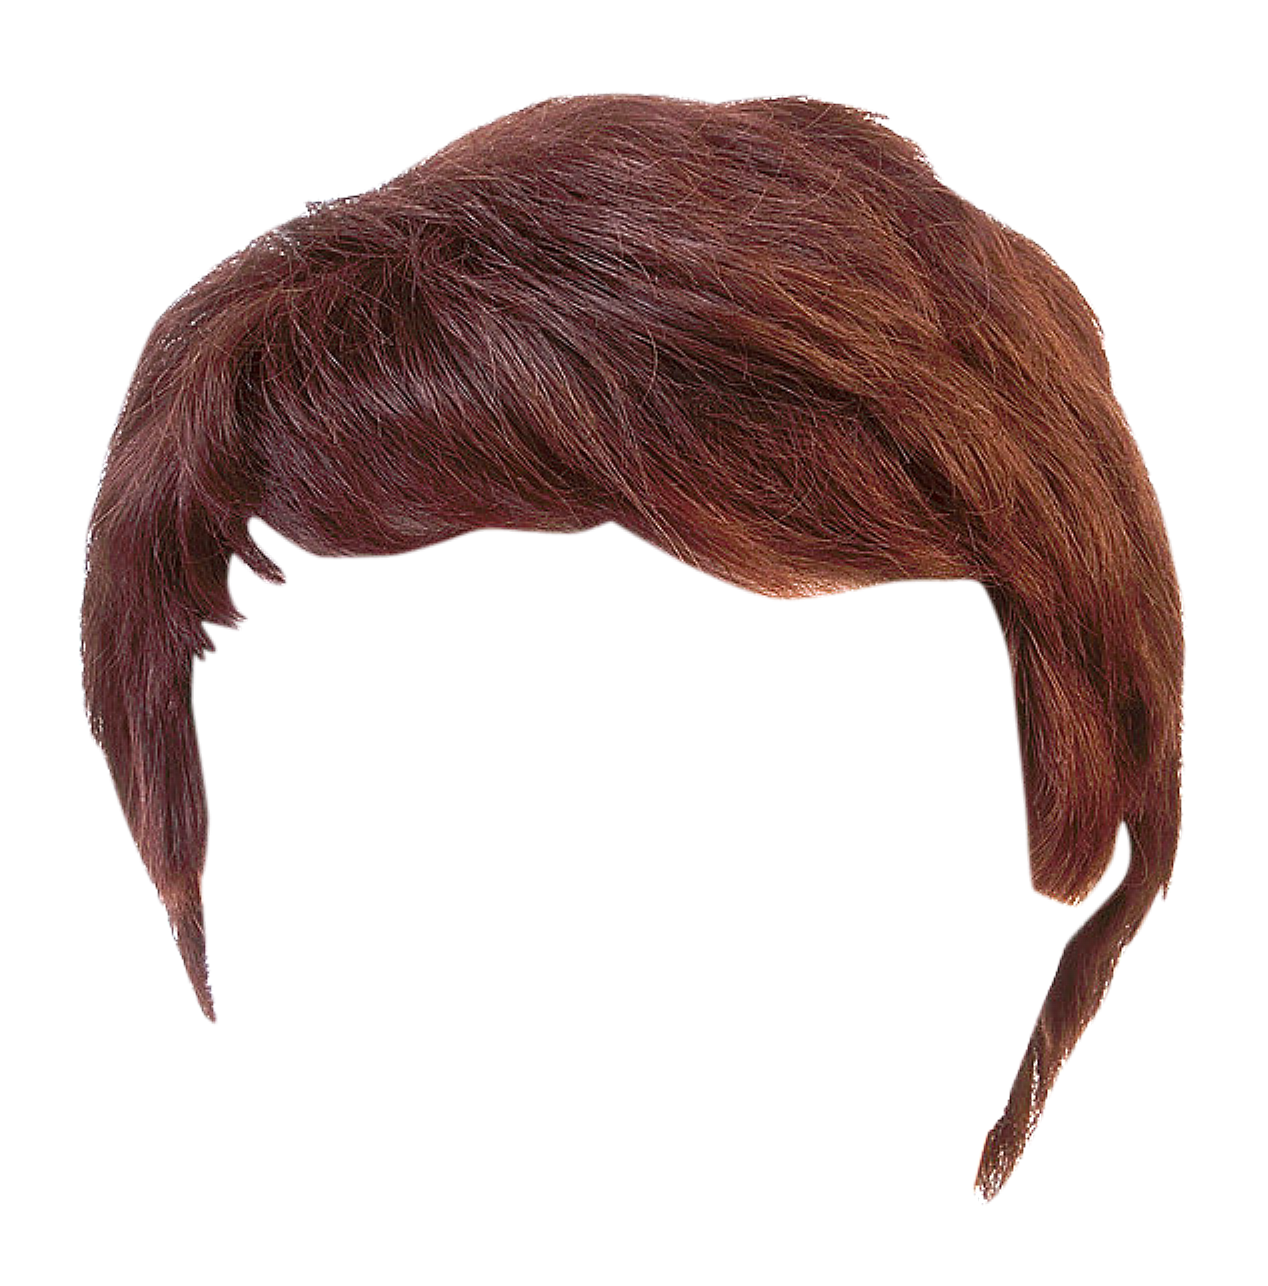 Png Hairstyle Hdpng.com 1268 - Hairstyle, Transparent background PNG HD thumbnail